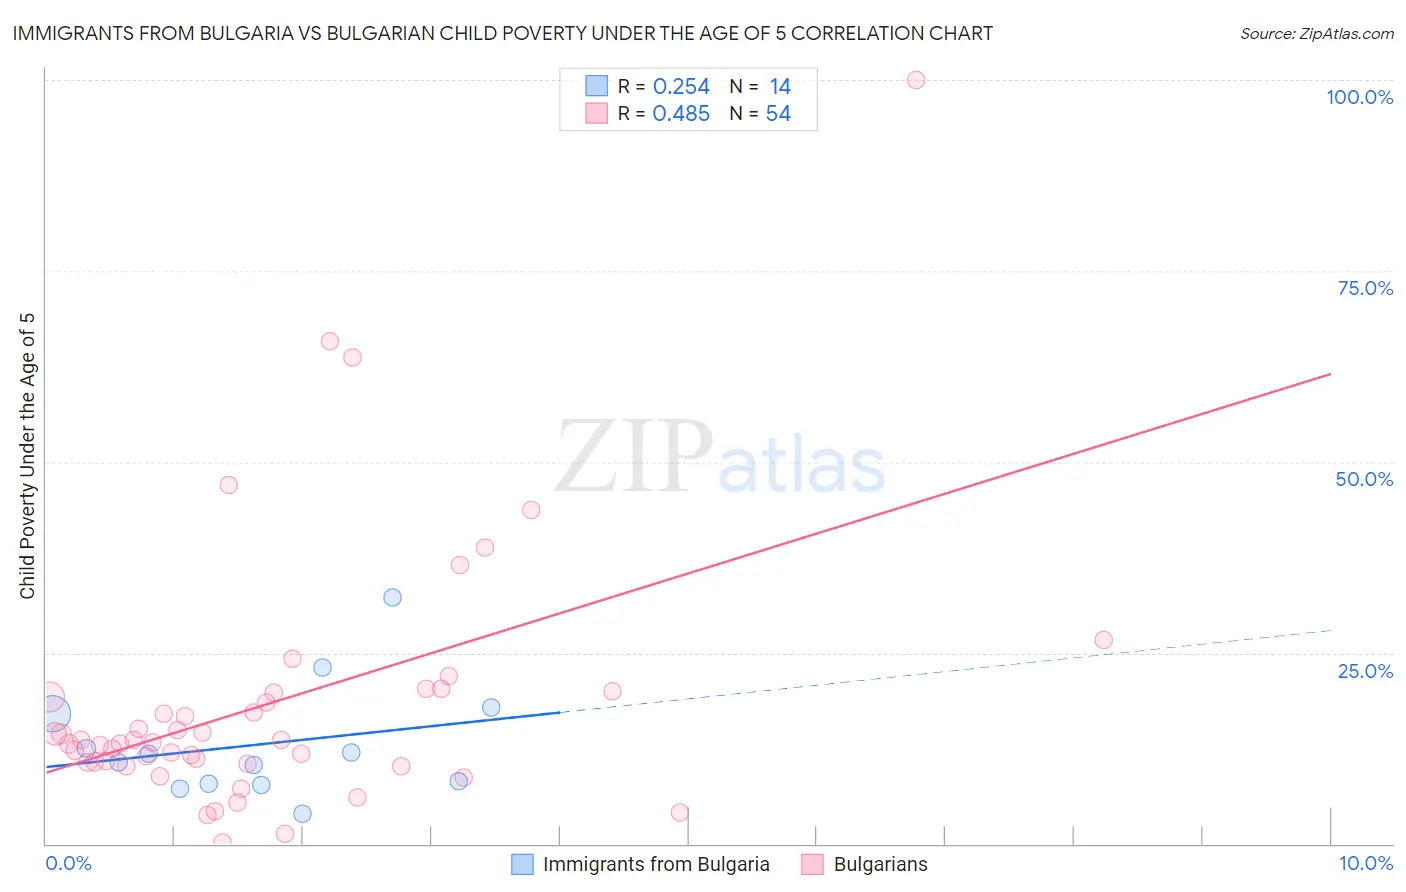 Immigrants from Bulgaria vs Bulgarian Child Poverty Under the Age of 5